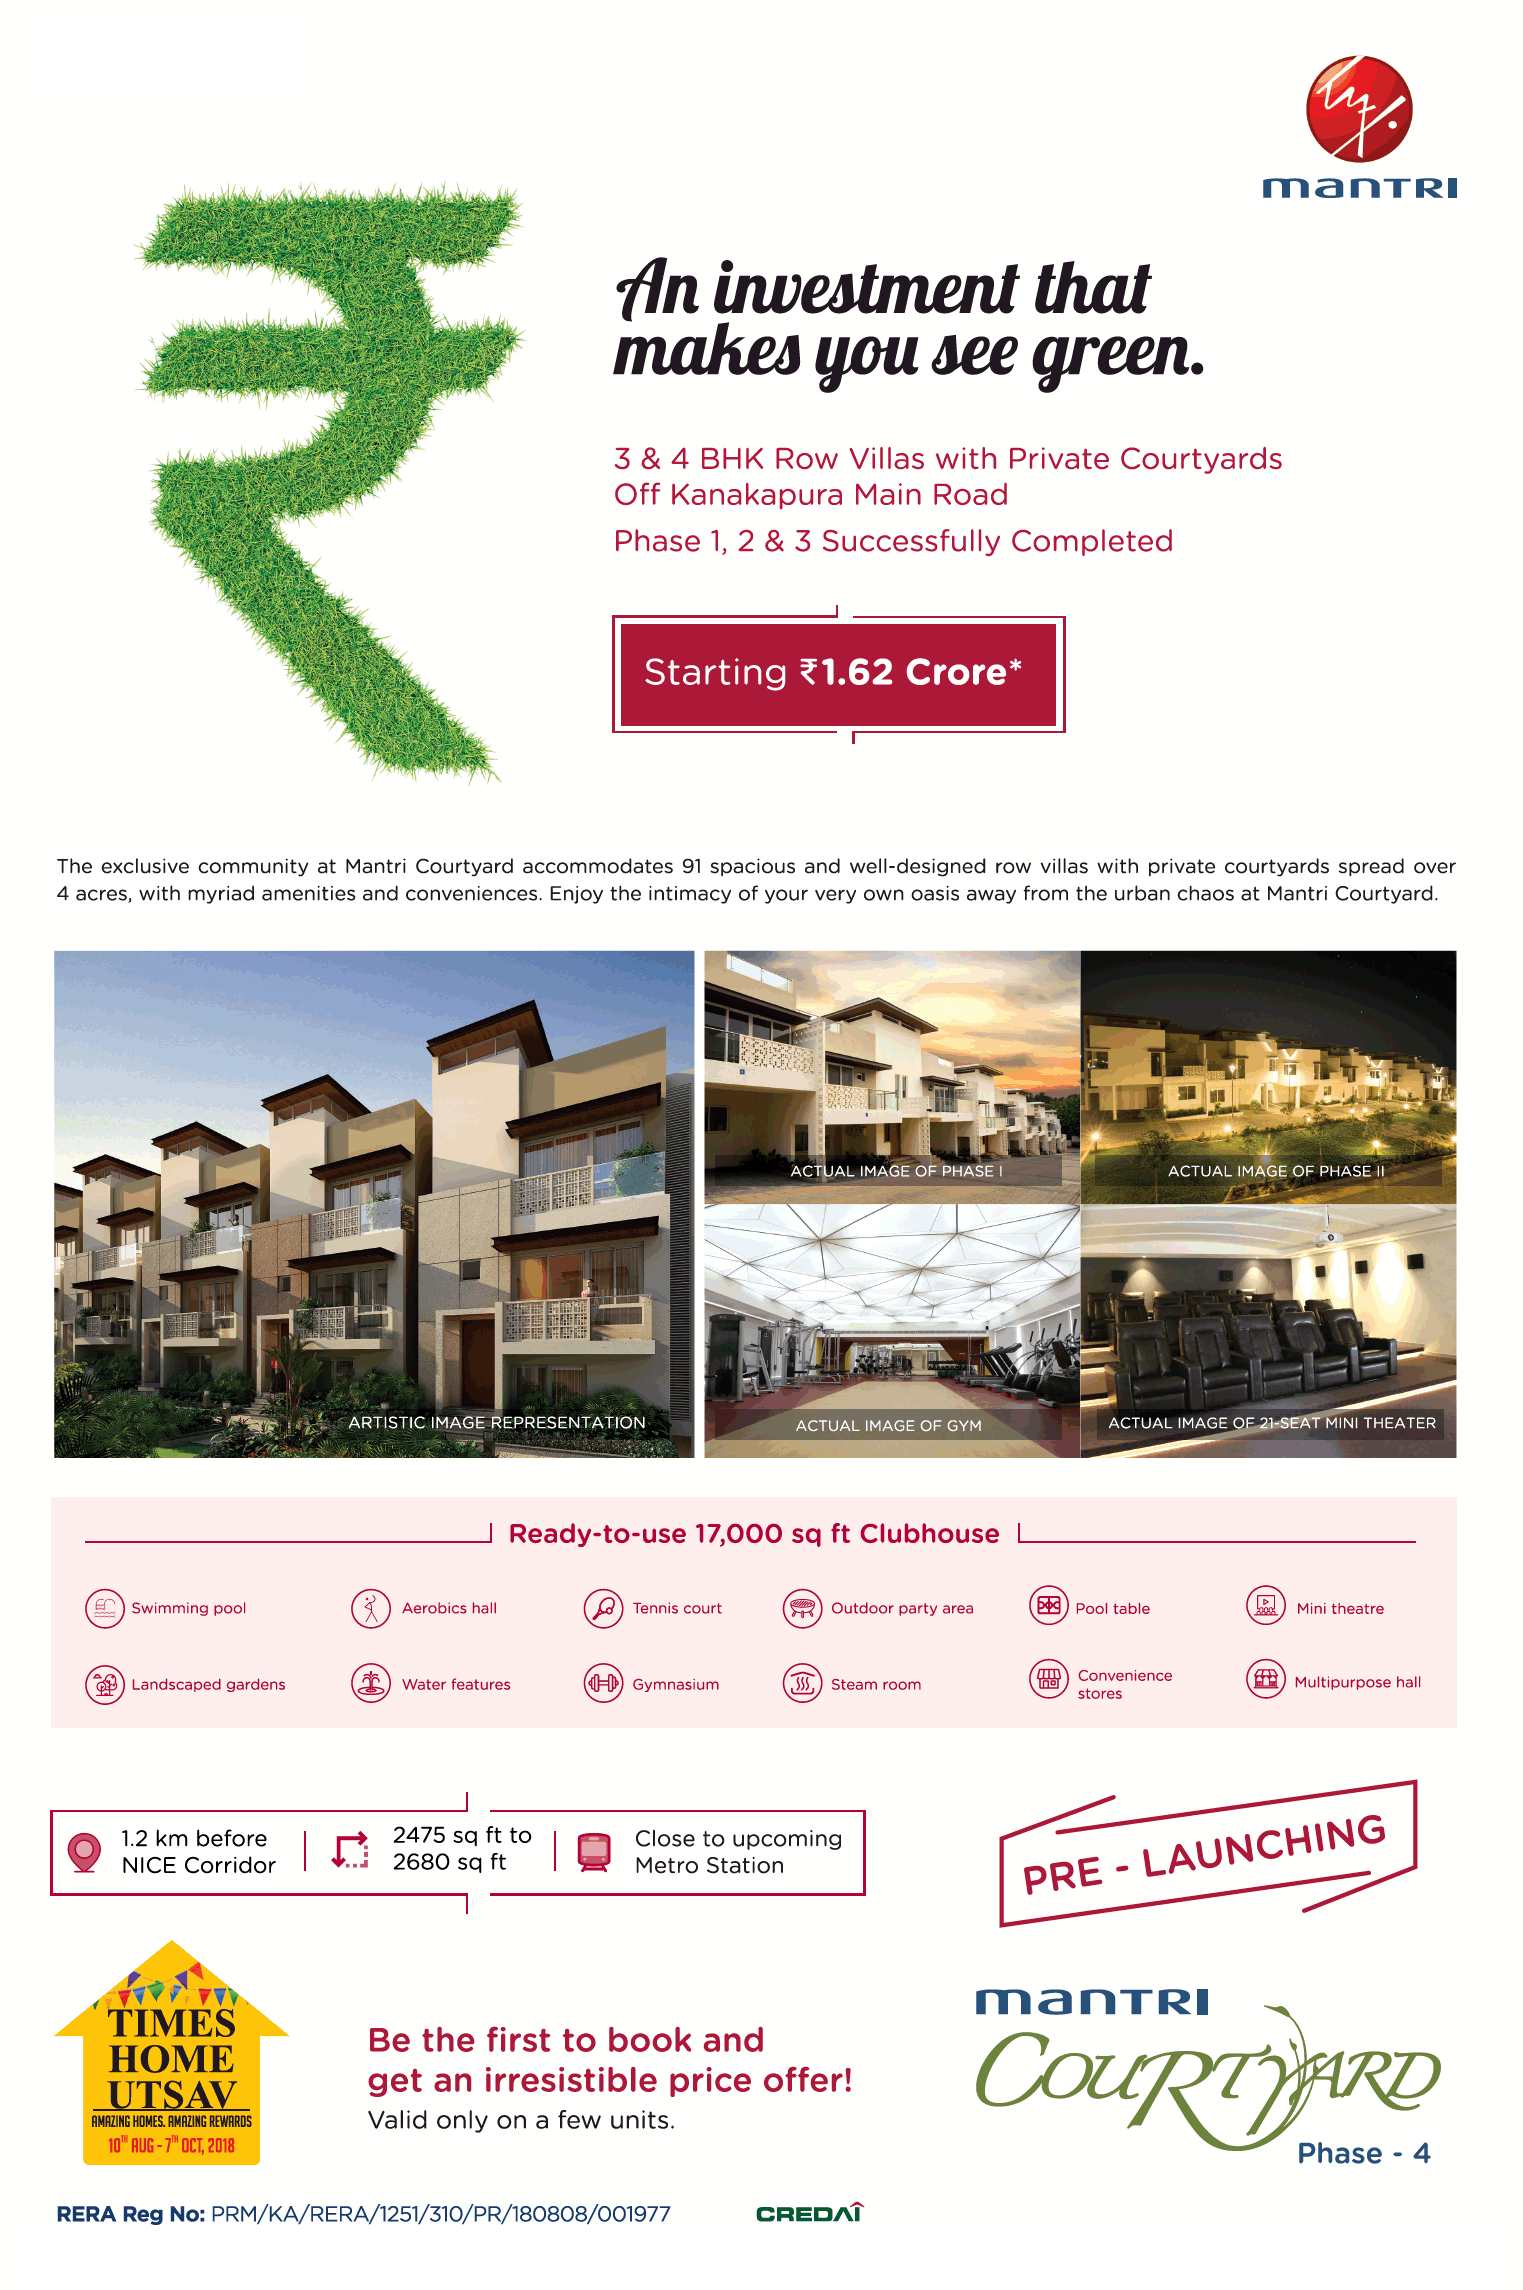 Book row villas with private courtyards @ Rs 1.62 cr at Mantri Courtyard in Bangalore Update